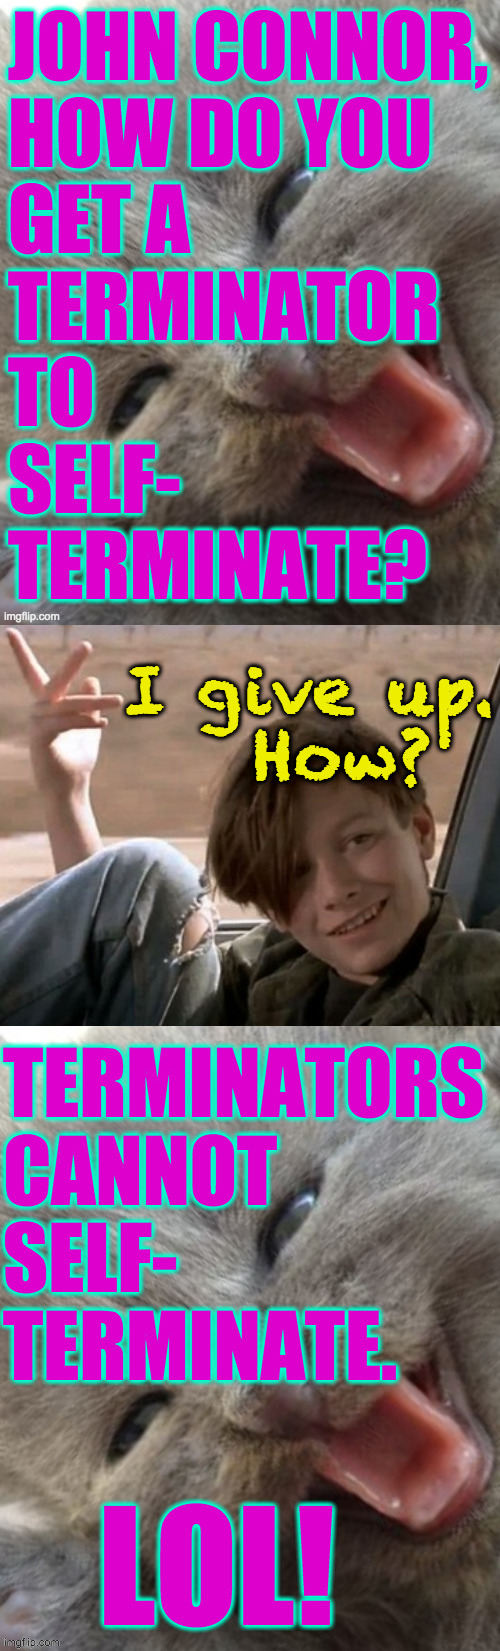 Do you see the joke? | JOHN CONNOR,
HOW DO YOU
GET A
TERMINATOR
TO
SELF-
TERMINATE? I give up.
  How? TERMINATORS
CANNOT
SELF-
TERMINATE. LOL! | image tagged in john connor,memes,do you see the joke | made w/ Imgflip meme maker